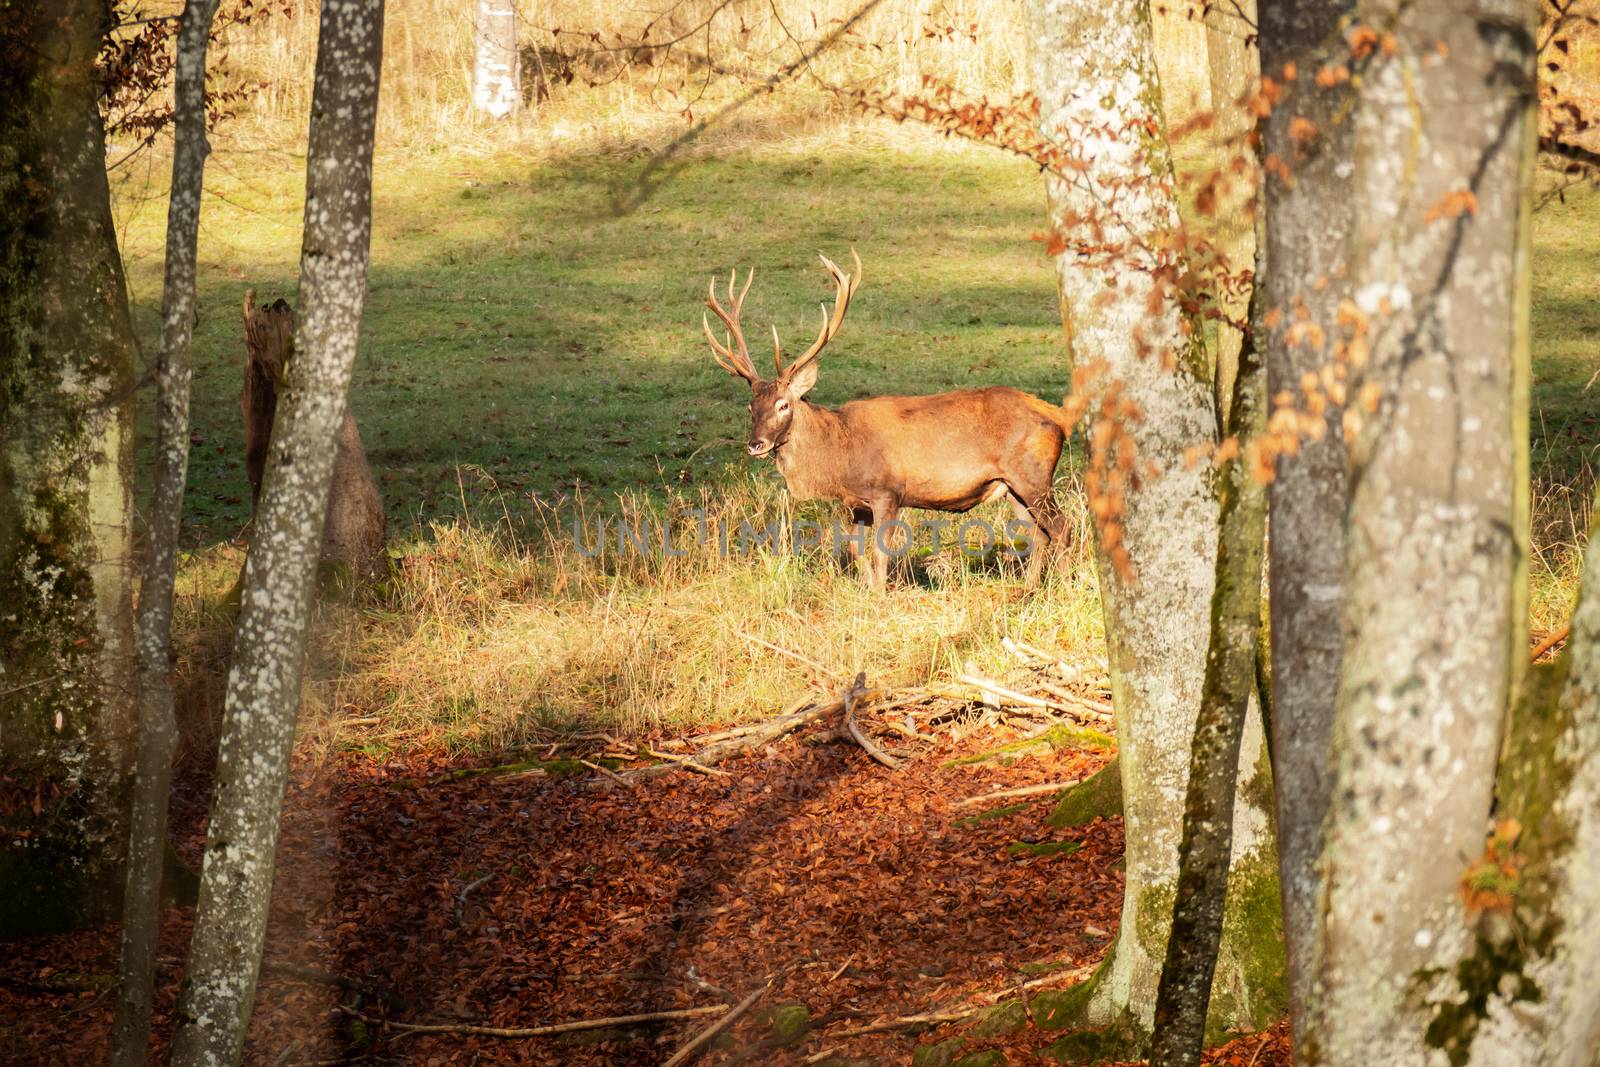 An image of a stag in the forest